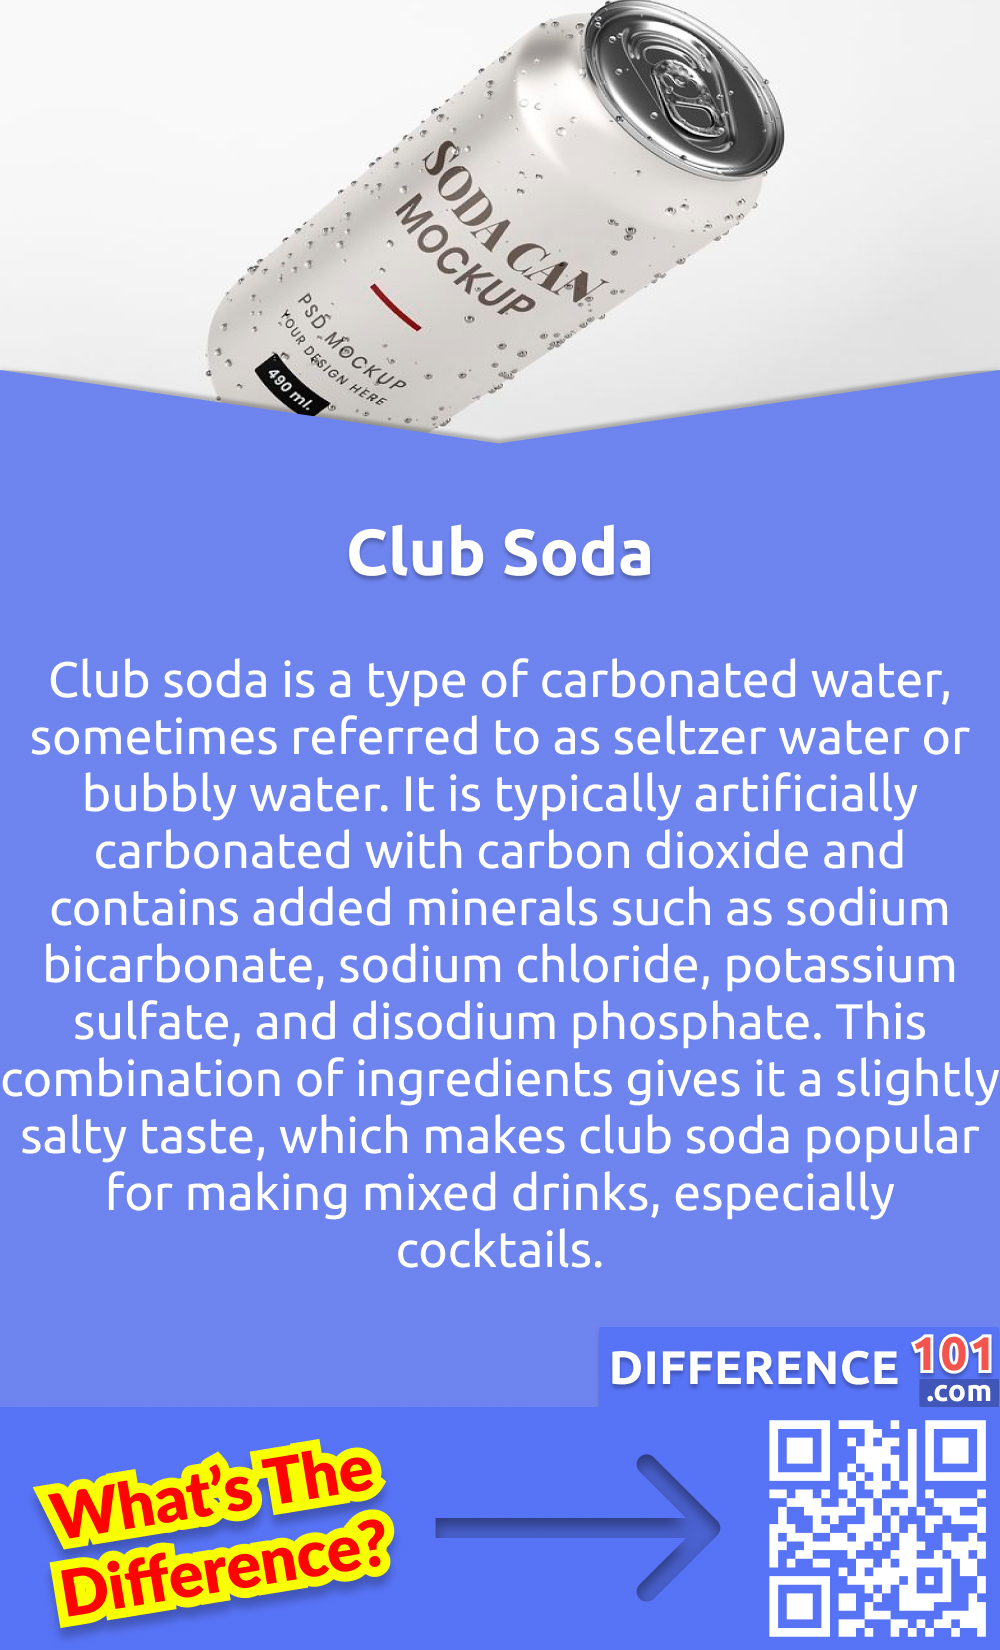 What Is Club Soda? Club soda is a type of carbonated water, sometimes referred to as seltzer water or bubbly water. It is typically artificially carbonated with carbon dioxide and contains added minerals such as sodium bicarbonate, sodium chloride, potassium sulfate, and disodium phosphate. This combination of ingredients gives it a slightly salty taste, which makes club soda popular for making mixed drinks, especially cocktails. Club soda is also a popular choice for individuals who are looking for a healthier alternative to soft drinks. It contains fewer calories and no added sugars, which makes it a great choice for those looking to reduce their sugar intake. In addition, club soda can also act as a digestive aid, as the added minerals help to break down food.